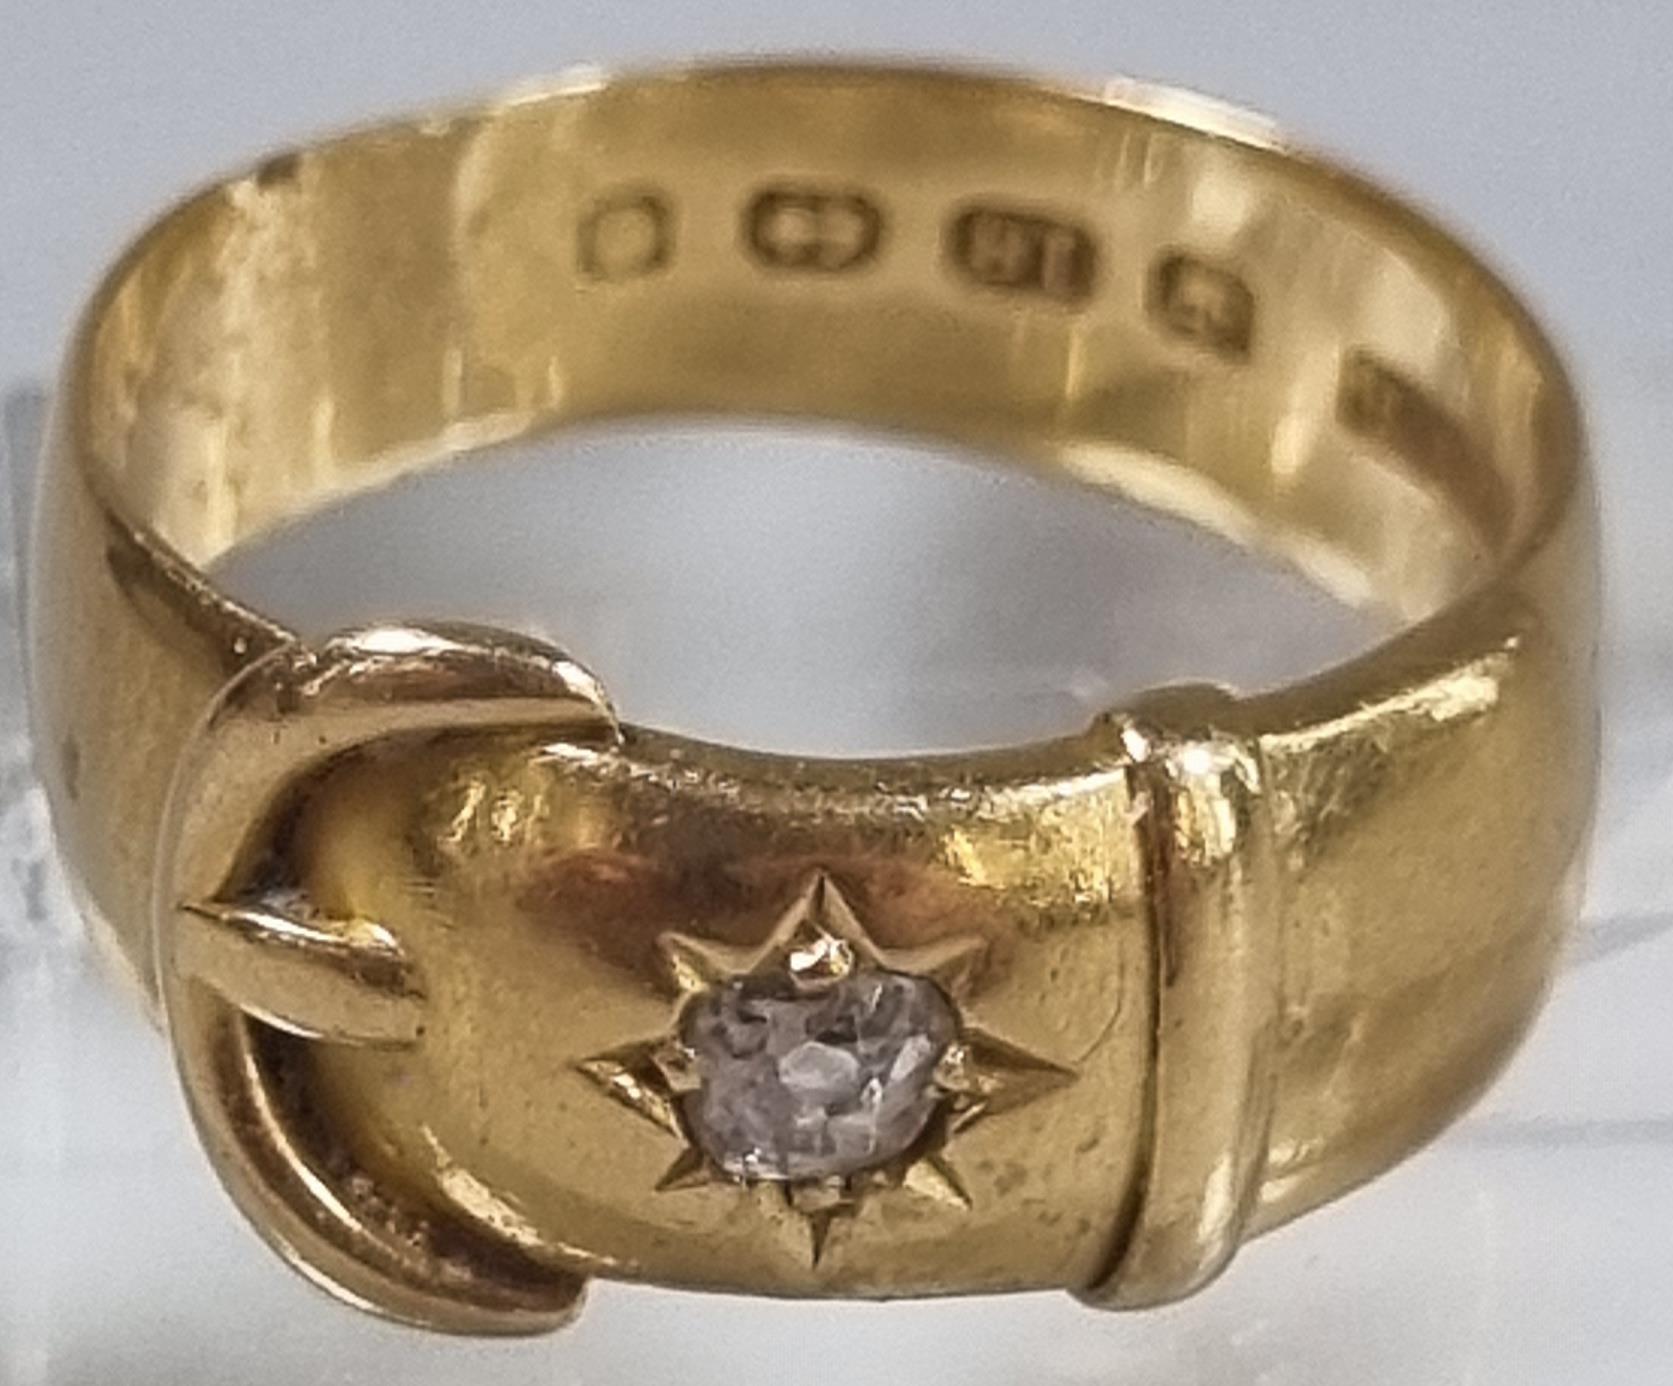 18ct gold buckle ring with inset diamond chip. 6.4g approx. Size P1/2. (B.P. 21% + VAT)